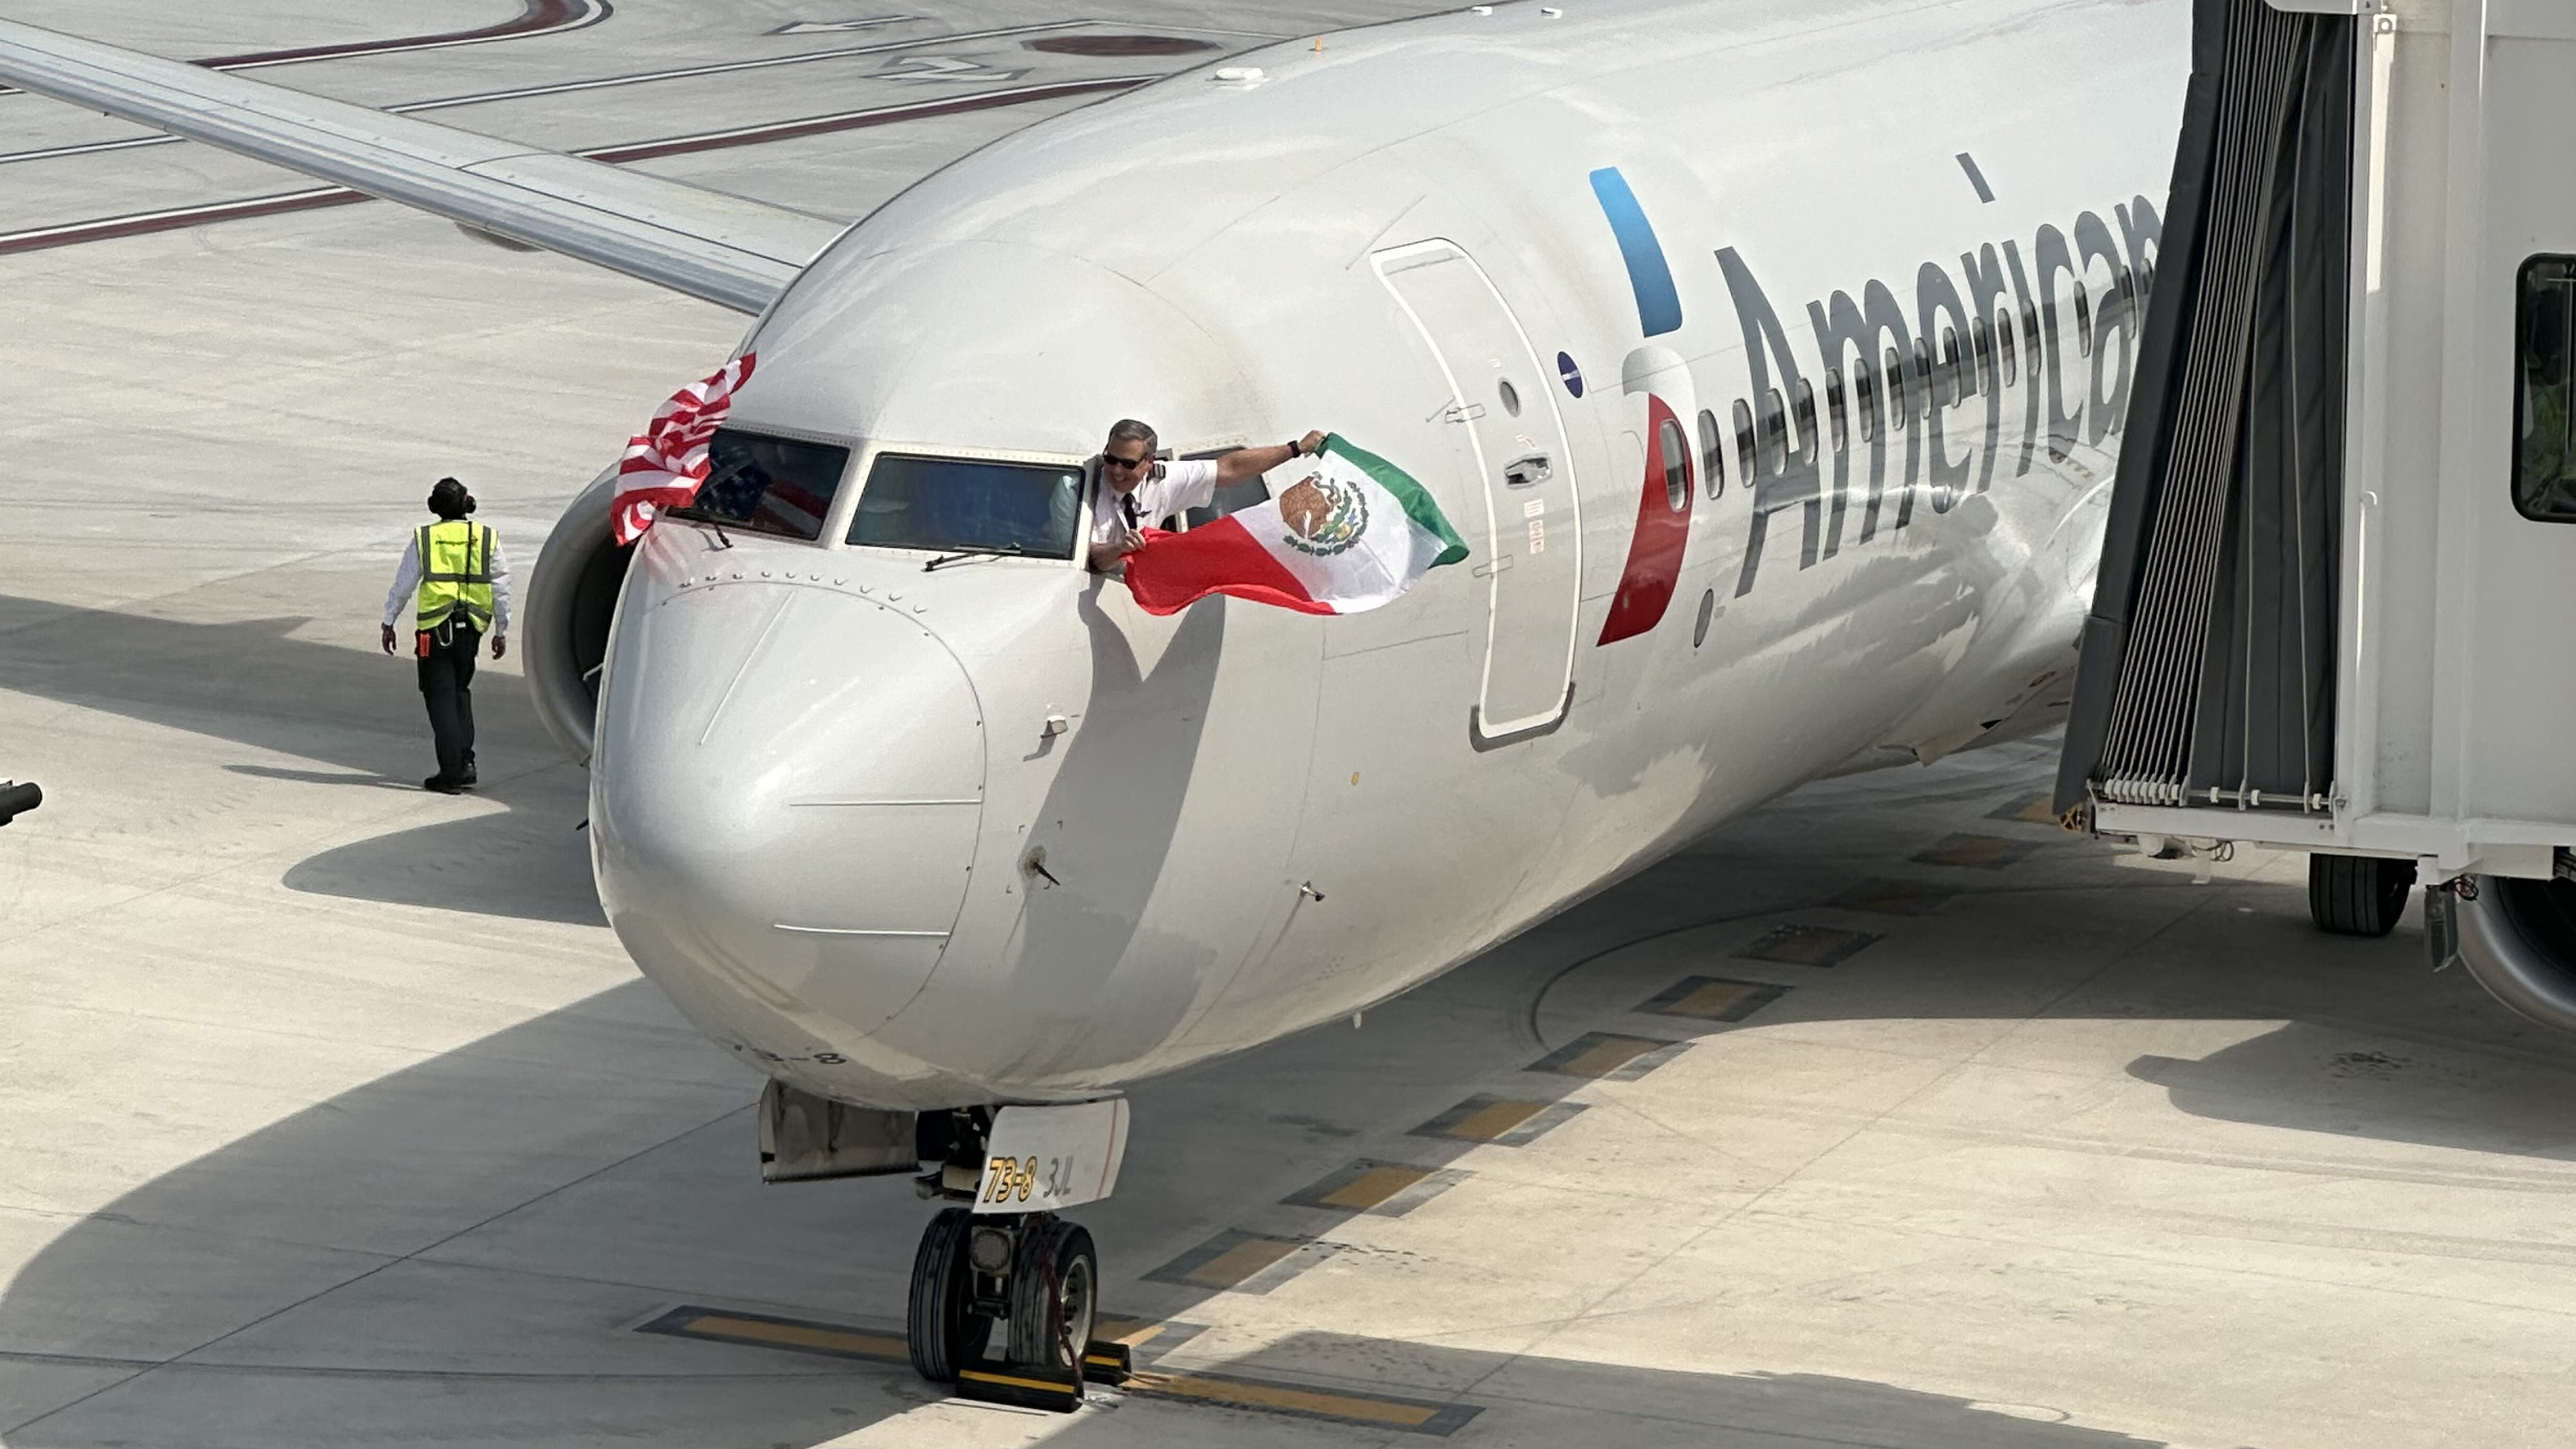 American Airlines begins flights to new airport in Tulum, Mexico
Thursday